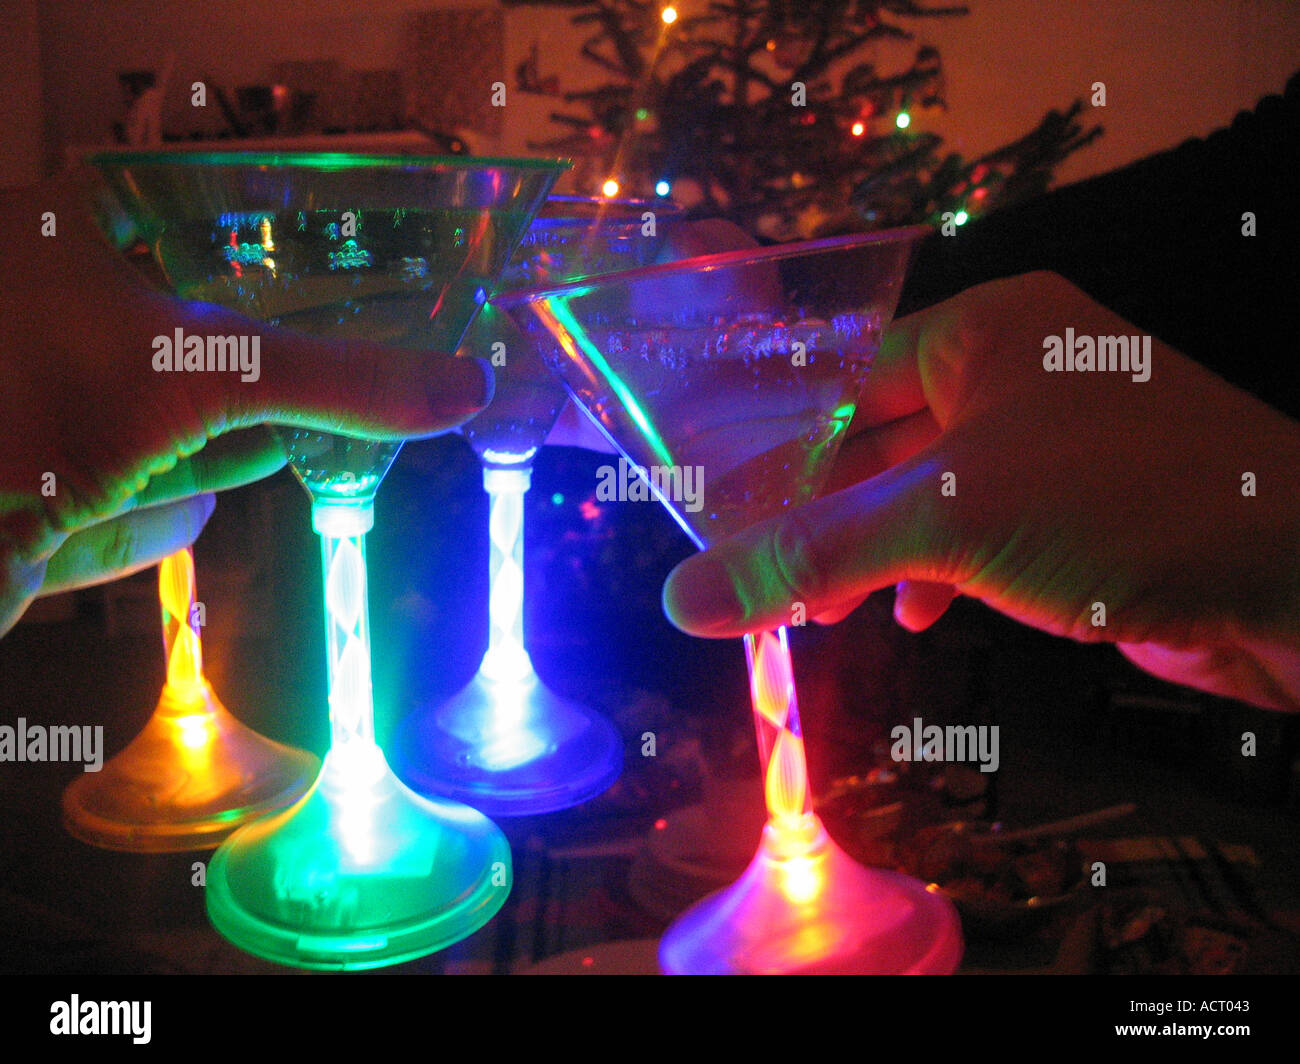 https://c8.alamy.com/comp/ACT043/christmas-toast-with-neon-stemmed-martini-glasses-ACT043.jpg